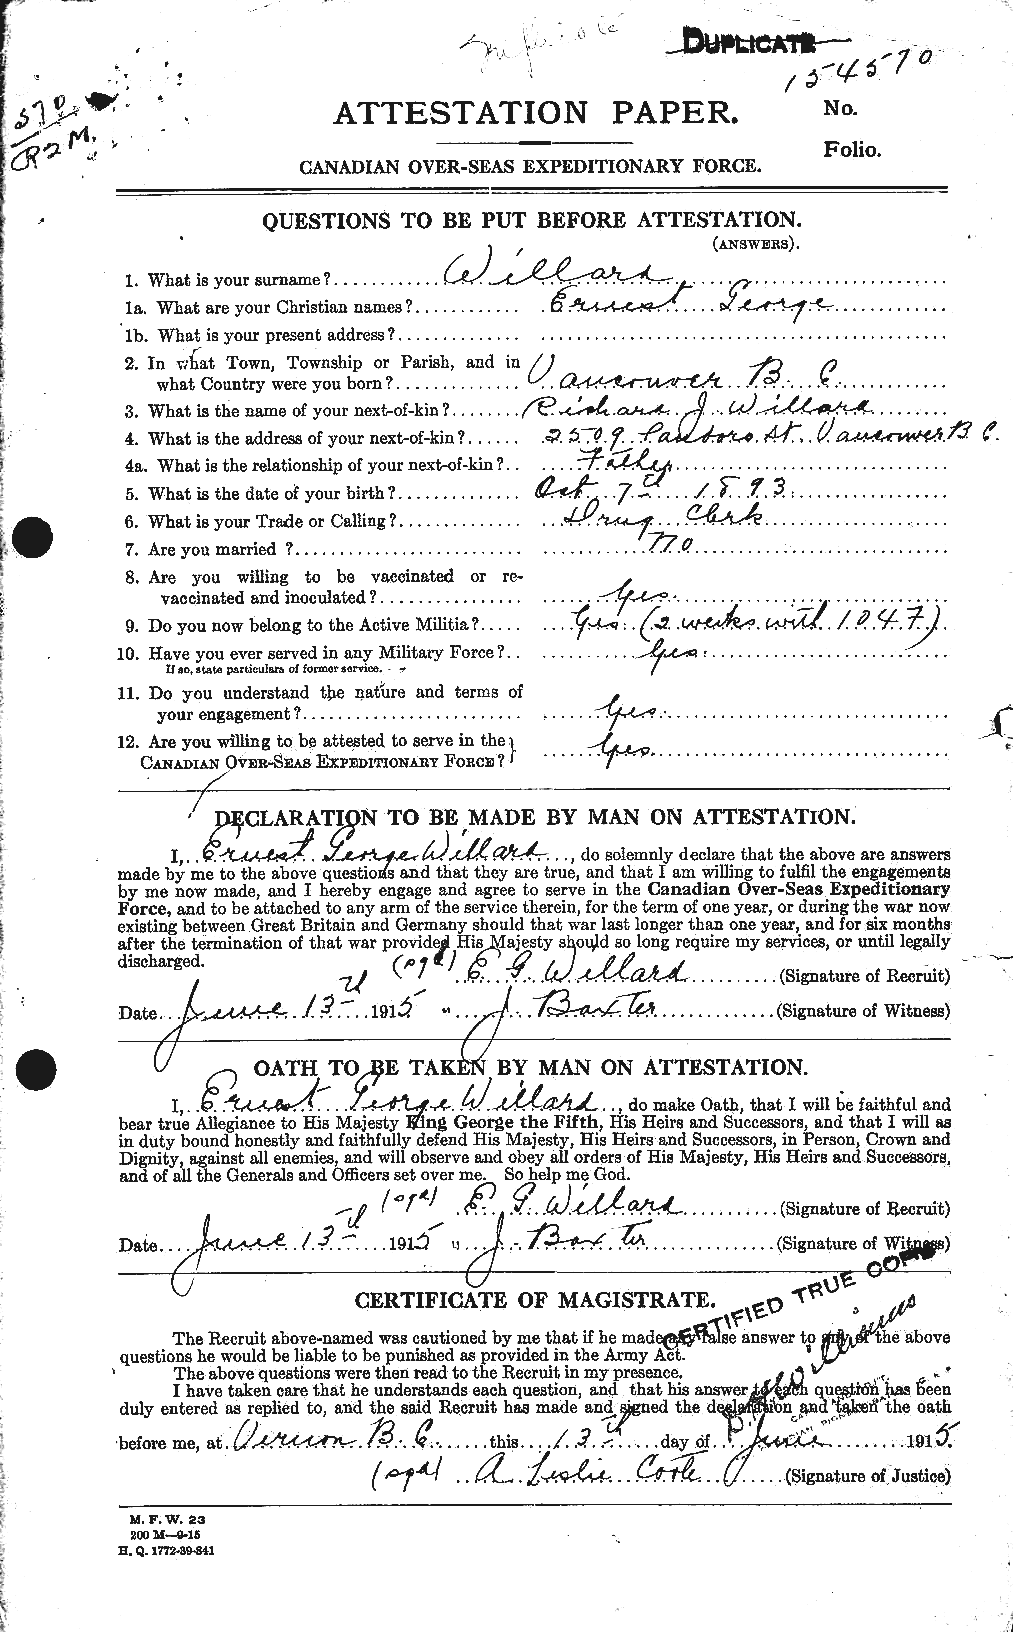 Personnel Records of the First World War - CEF 675194a